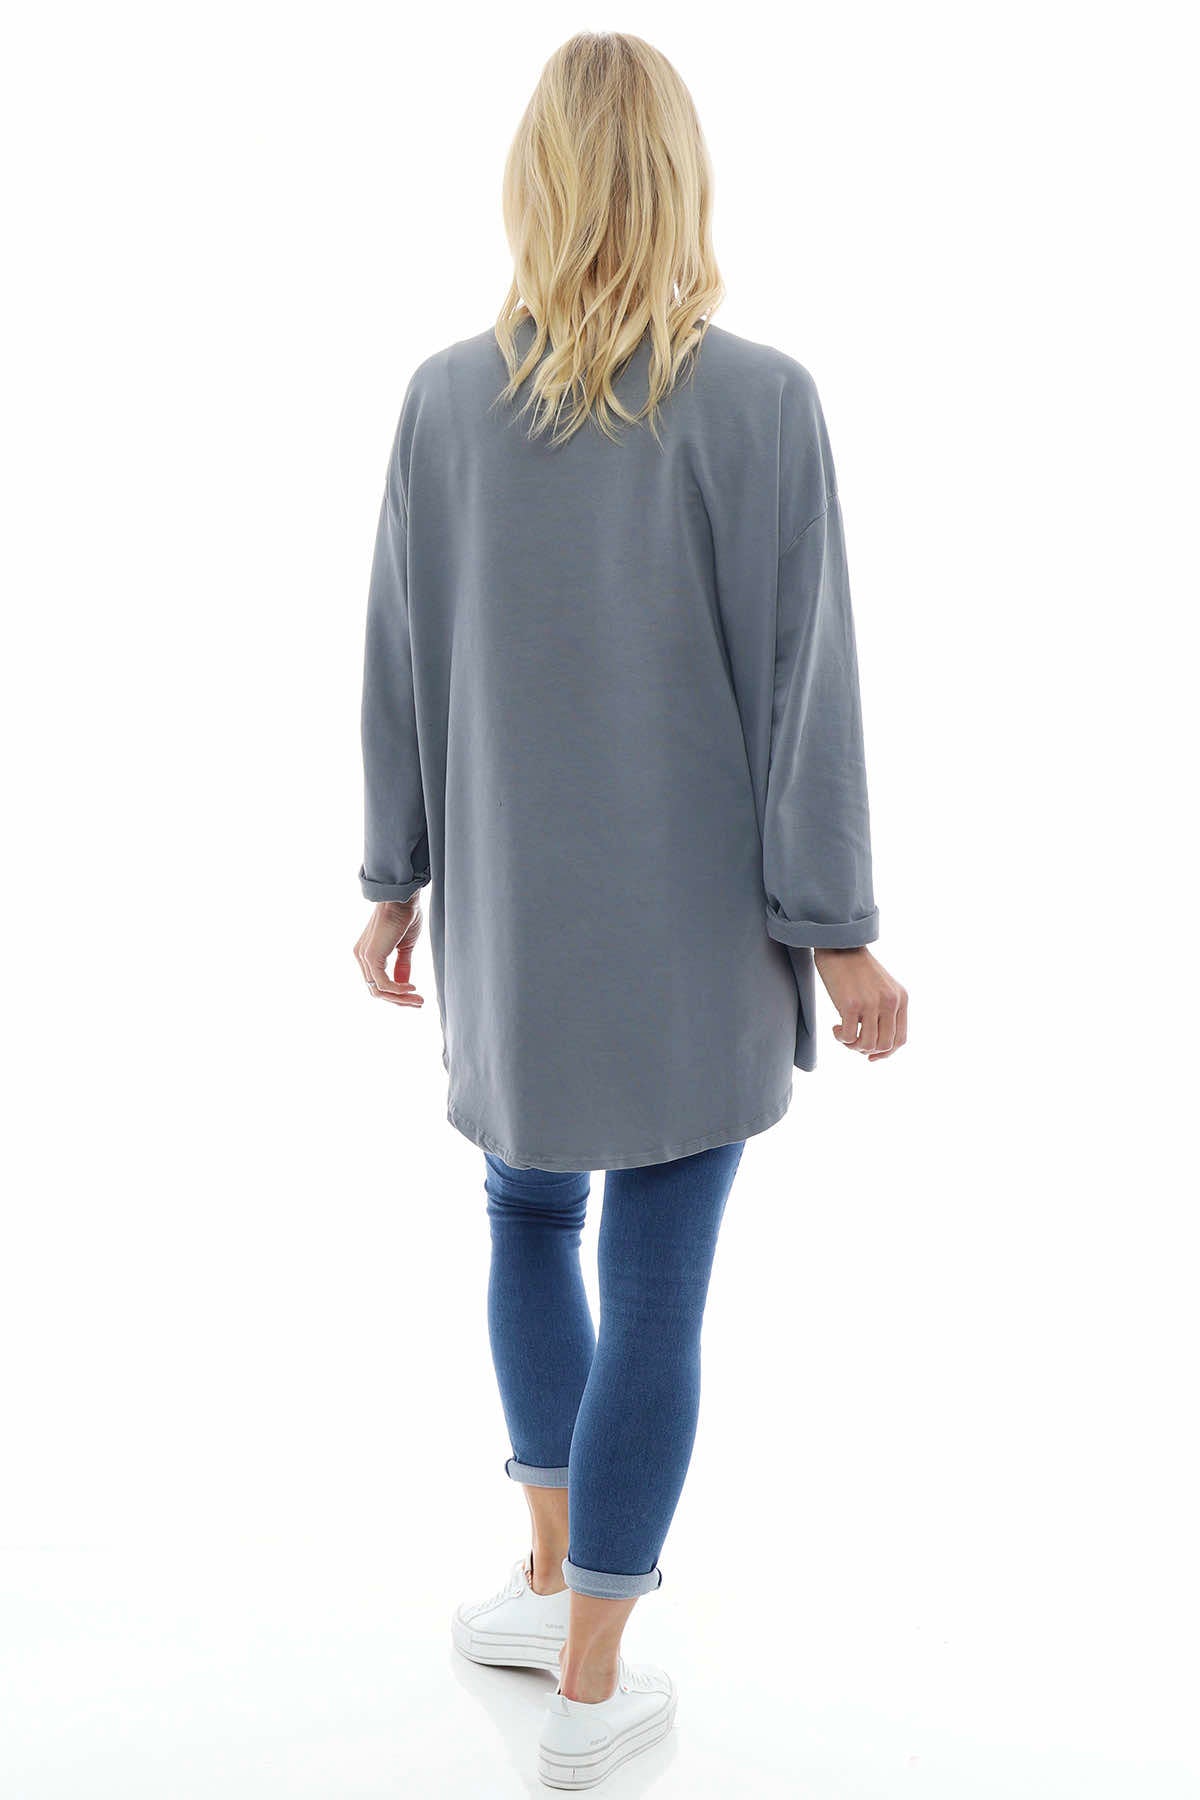 Guinevere Cotton Top Mid Grey